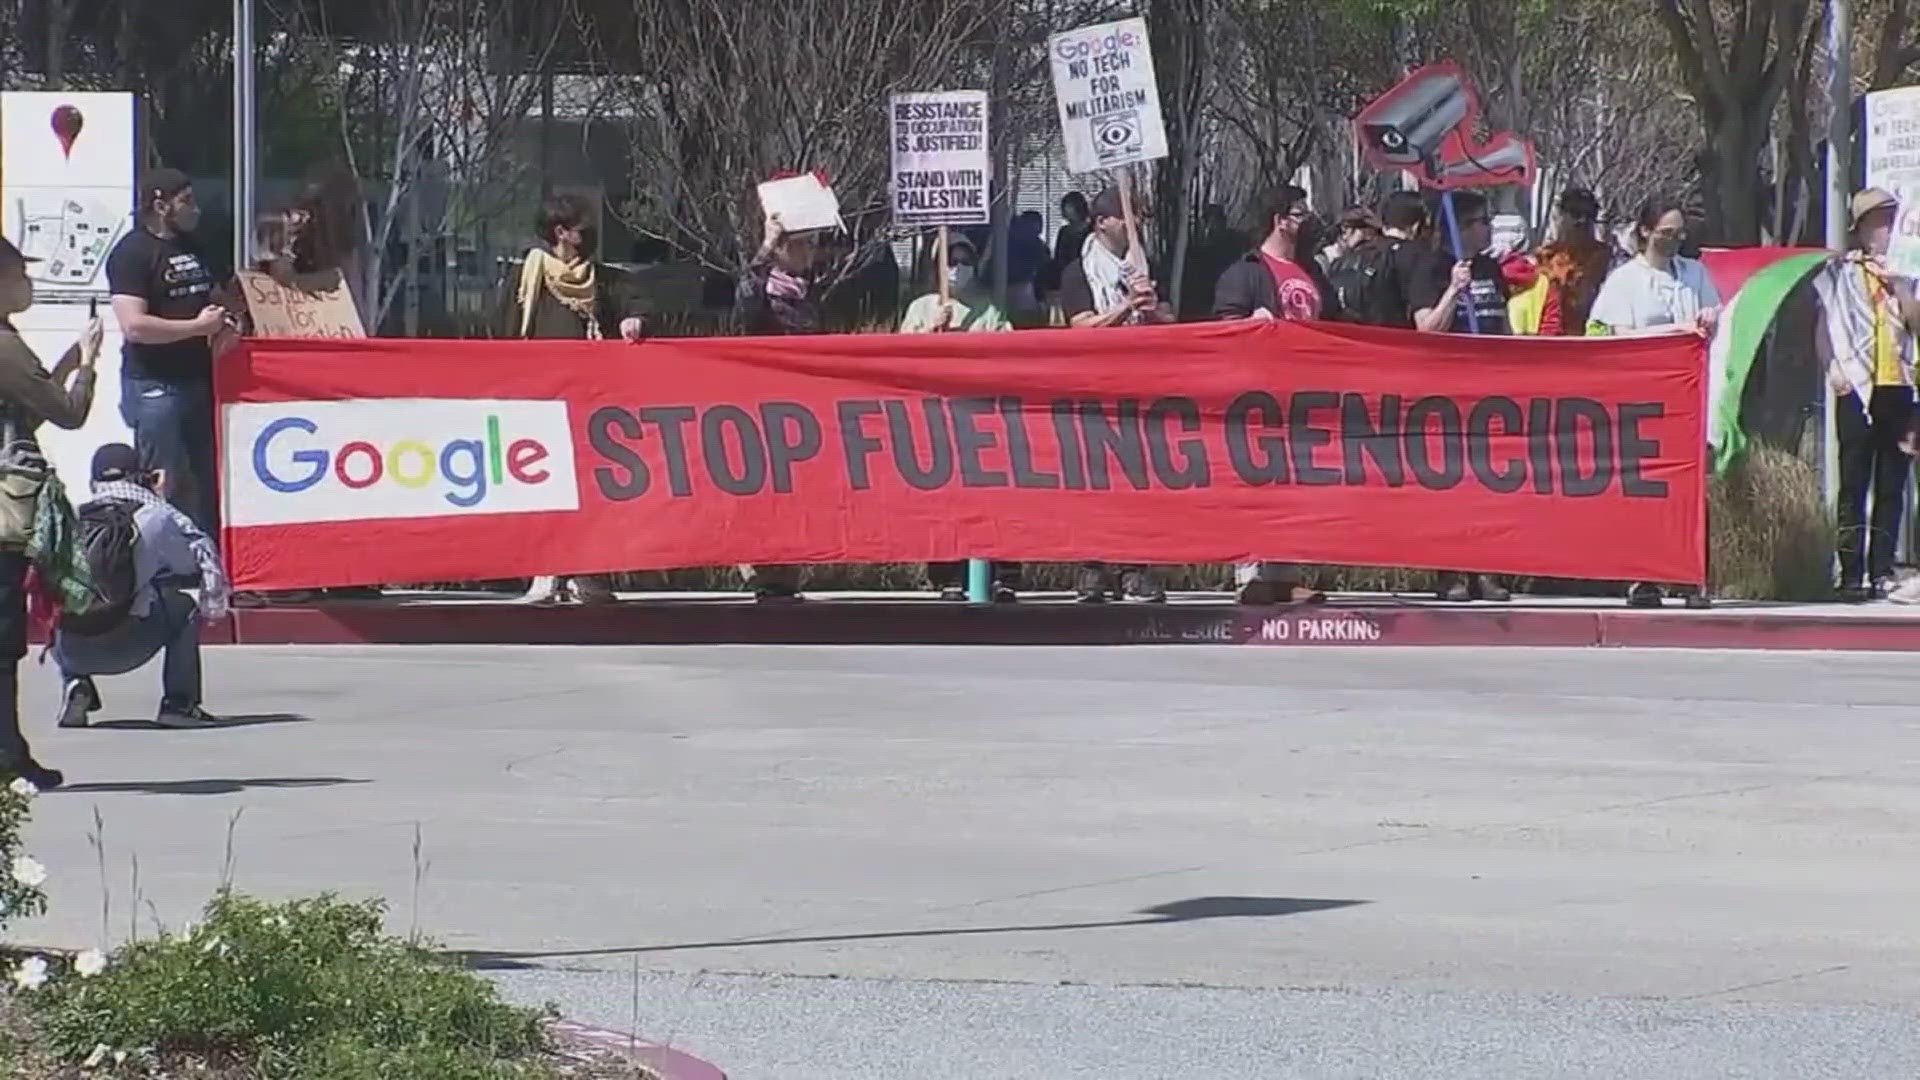 The group behind protests at Google offices over the company's contract with the Israeli government says the company has fired a total of 50 workers.